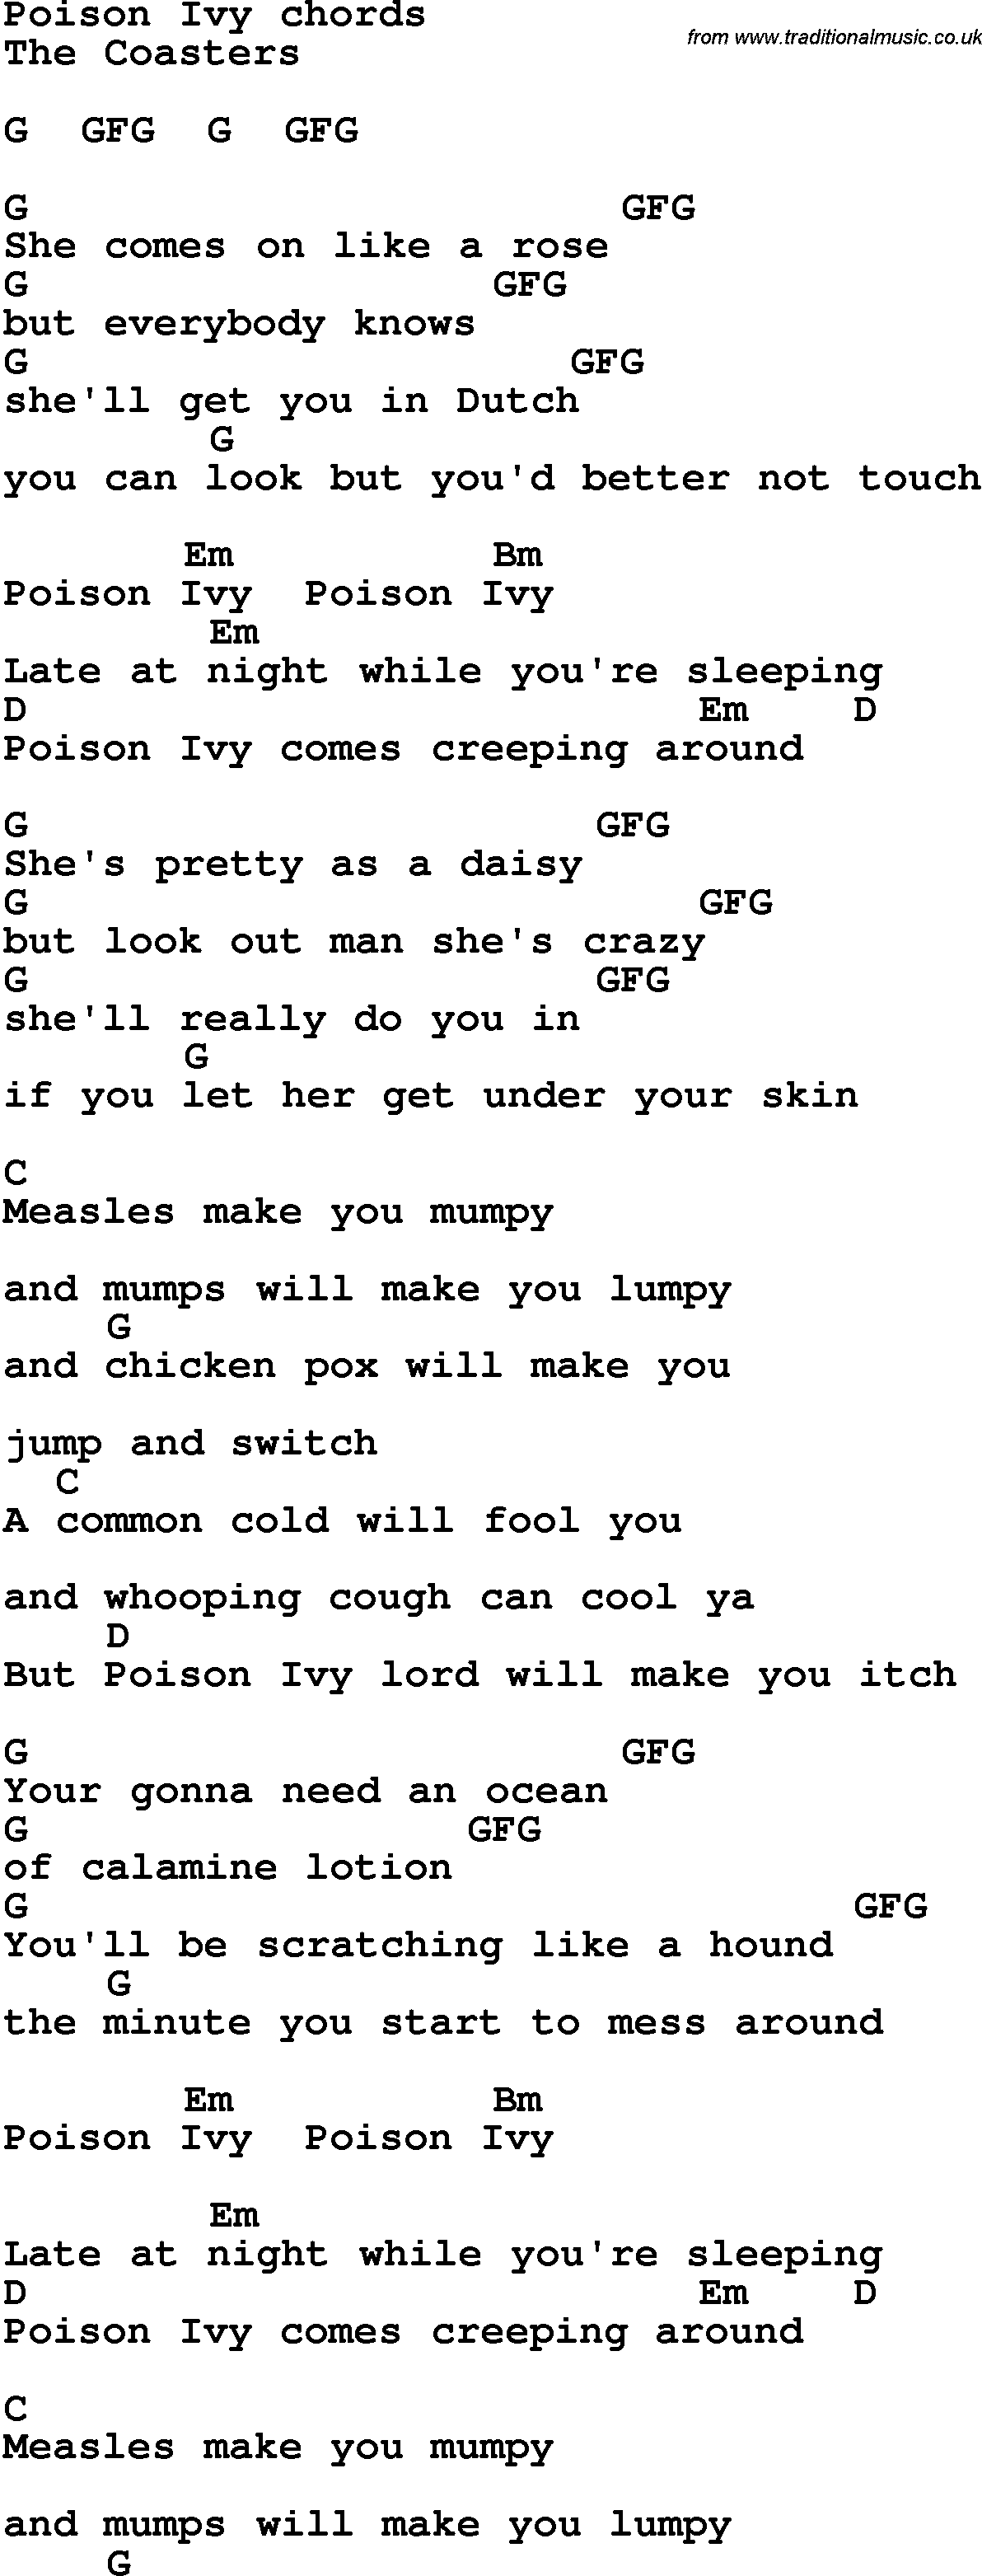 Song Lyrics with guitar chords for Poison Ivy